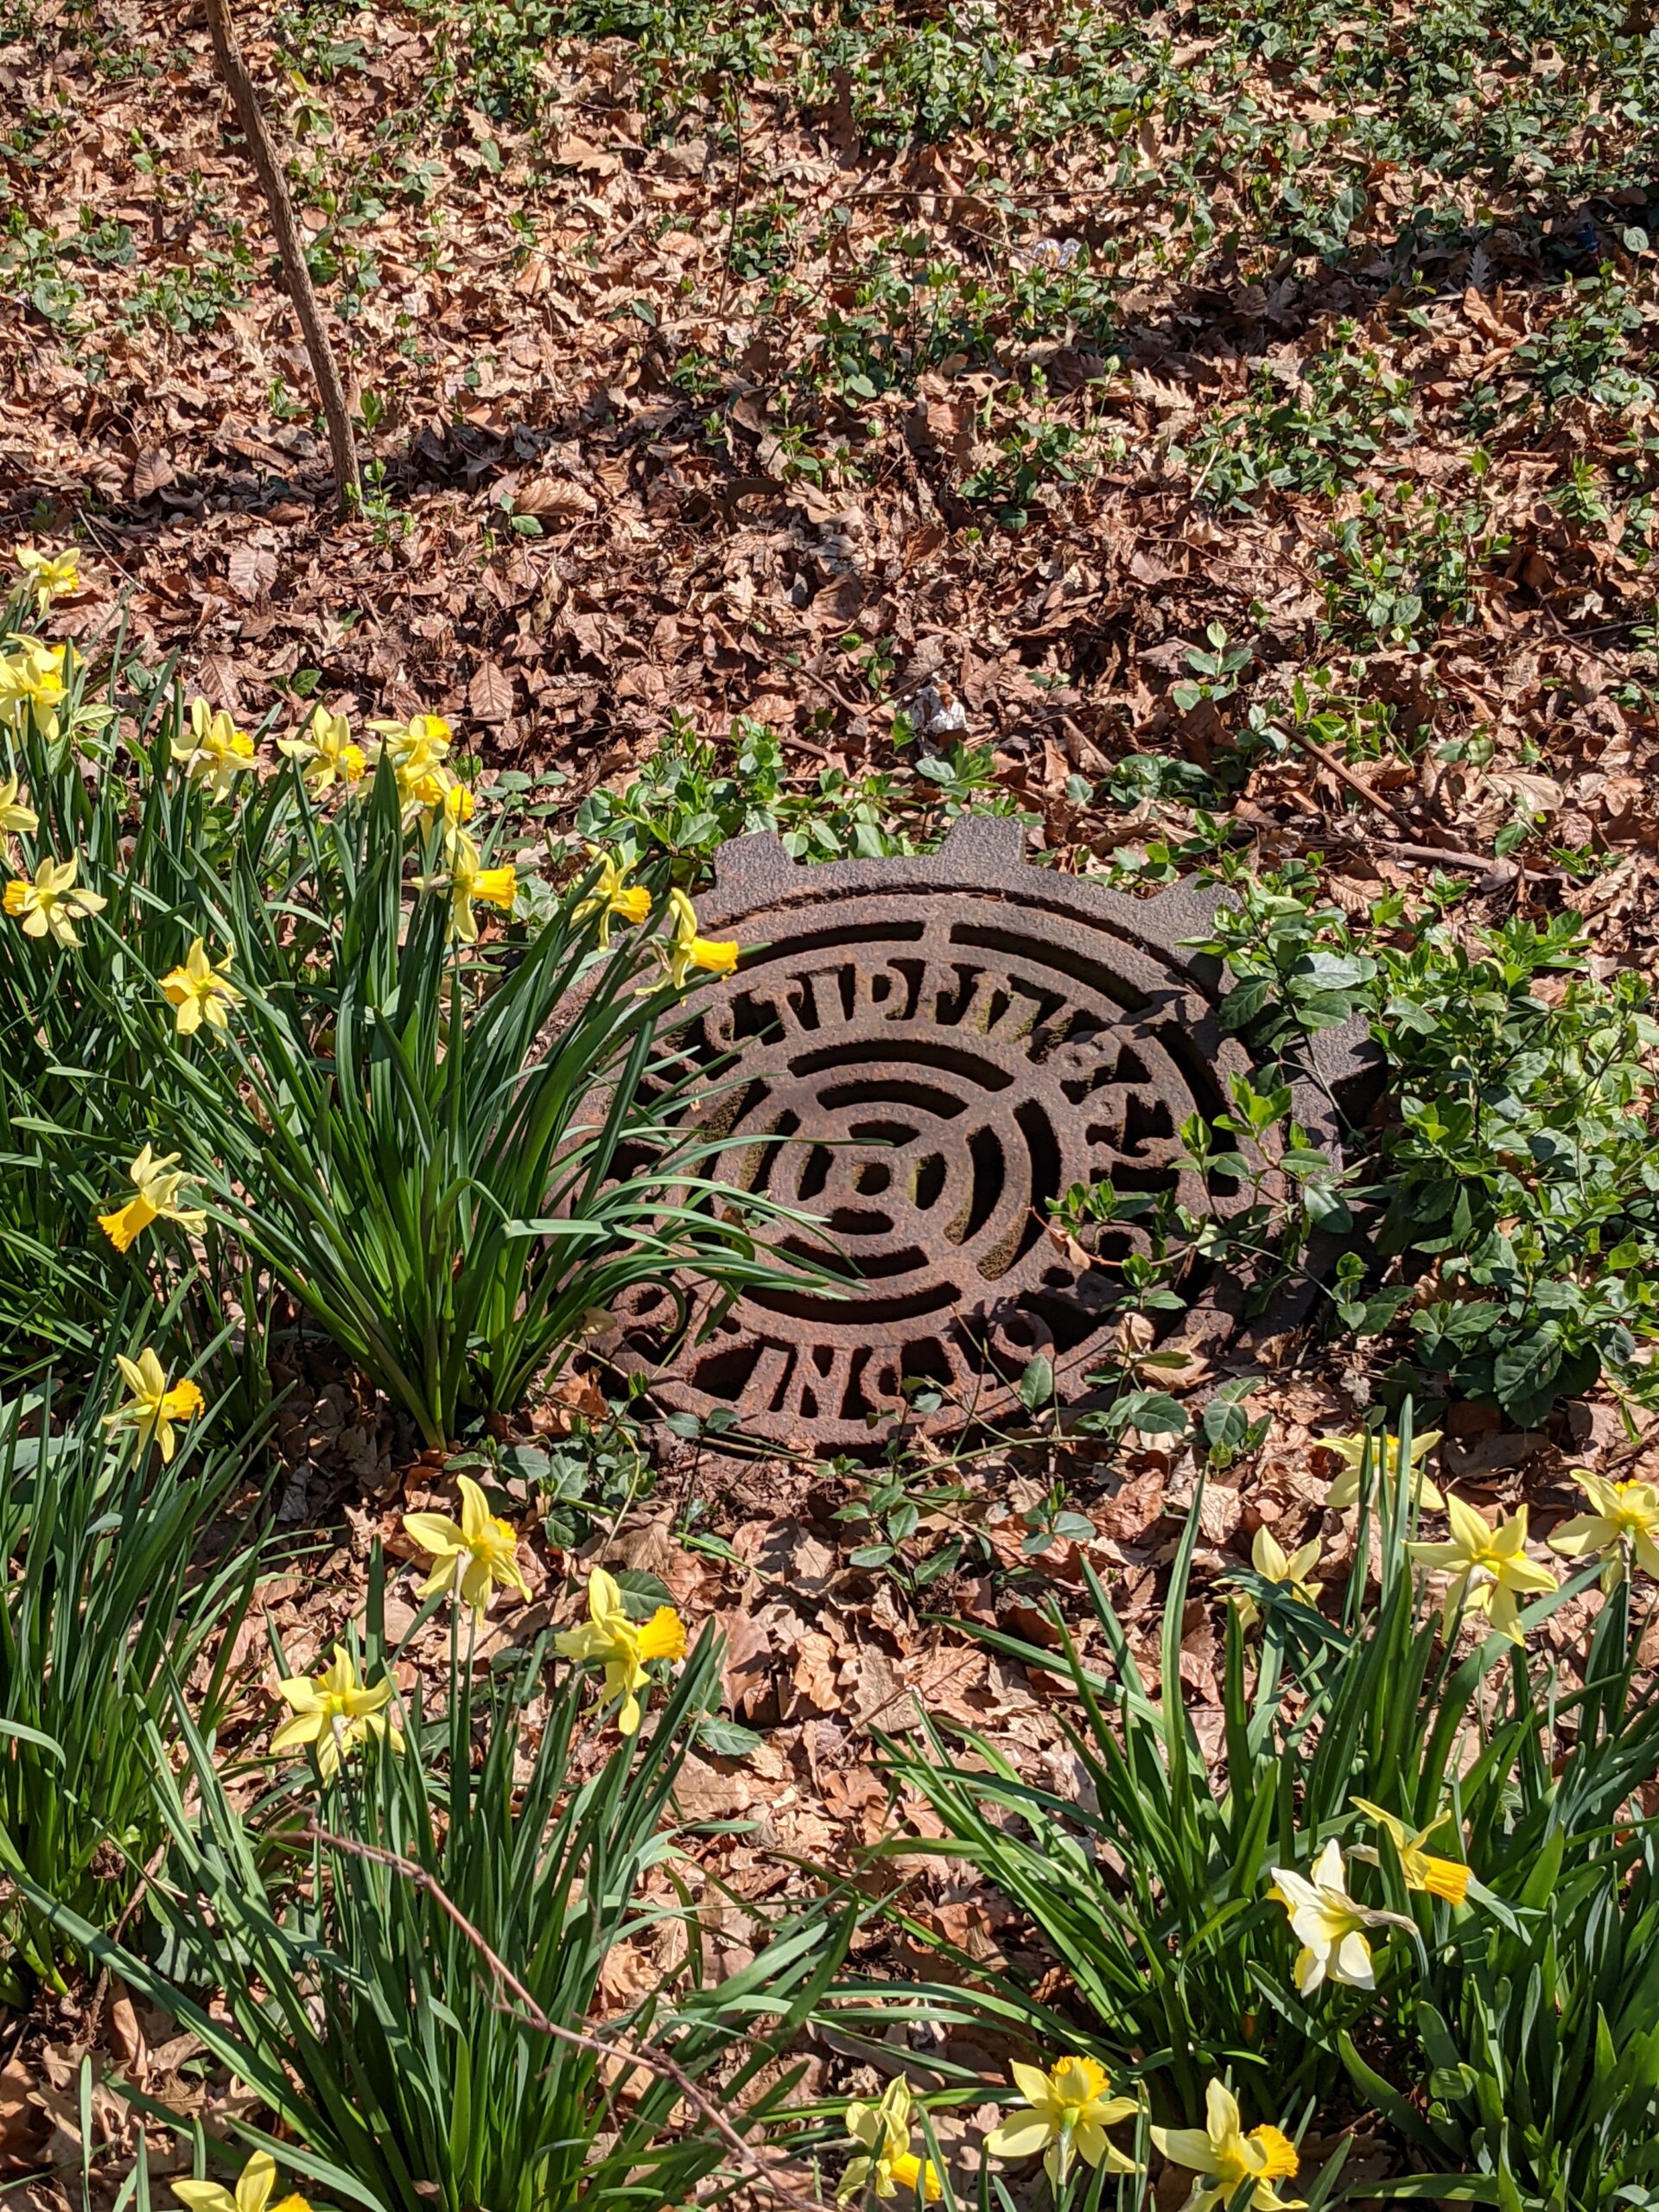 an old manhole cover among yellow flowers